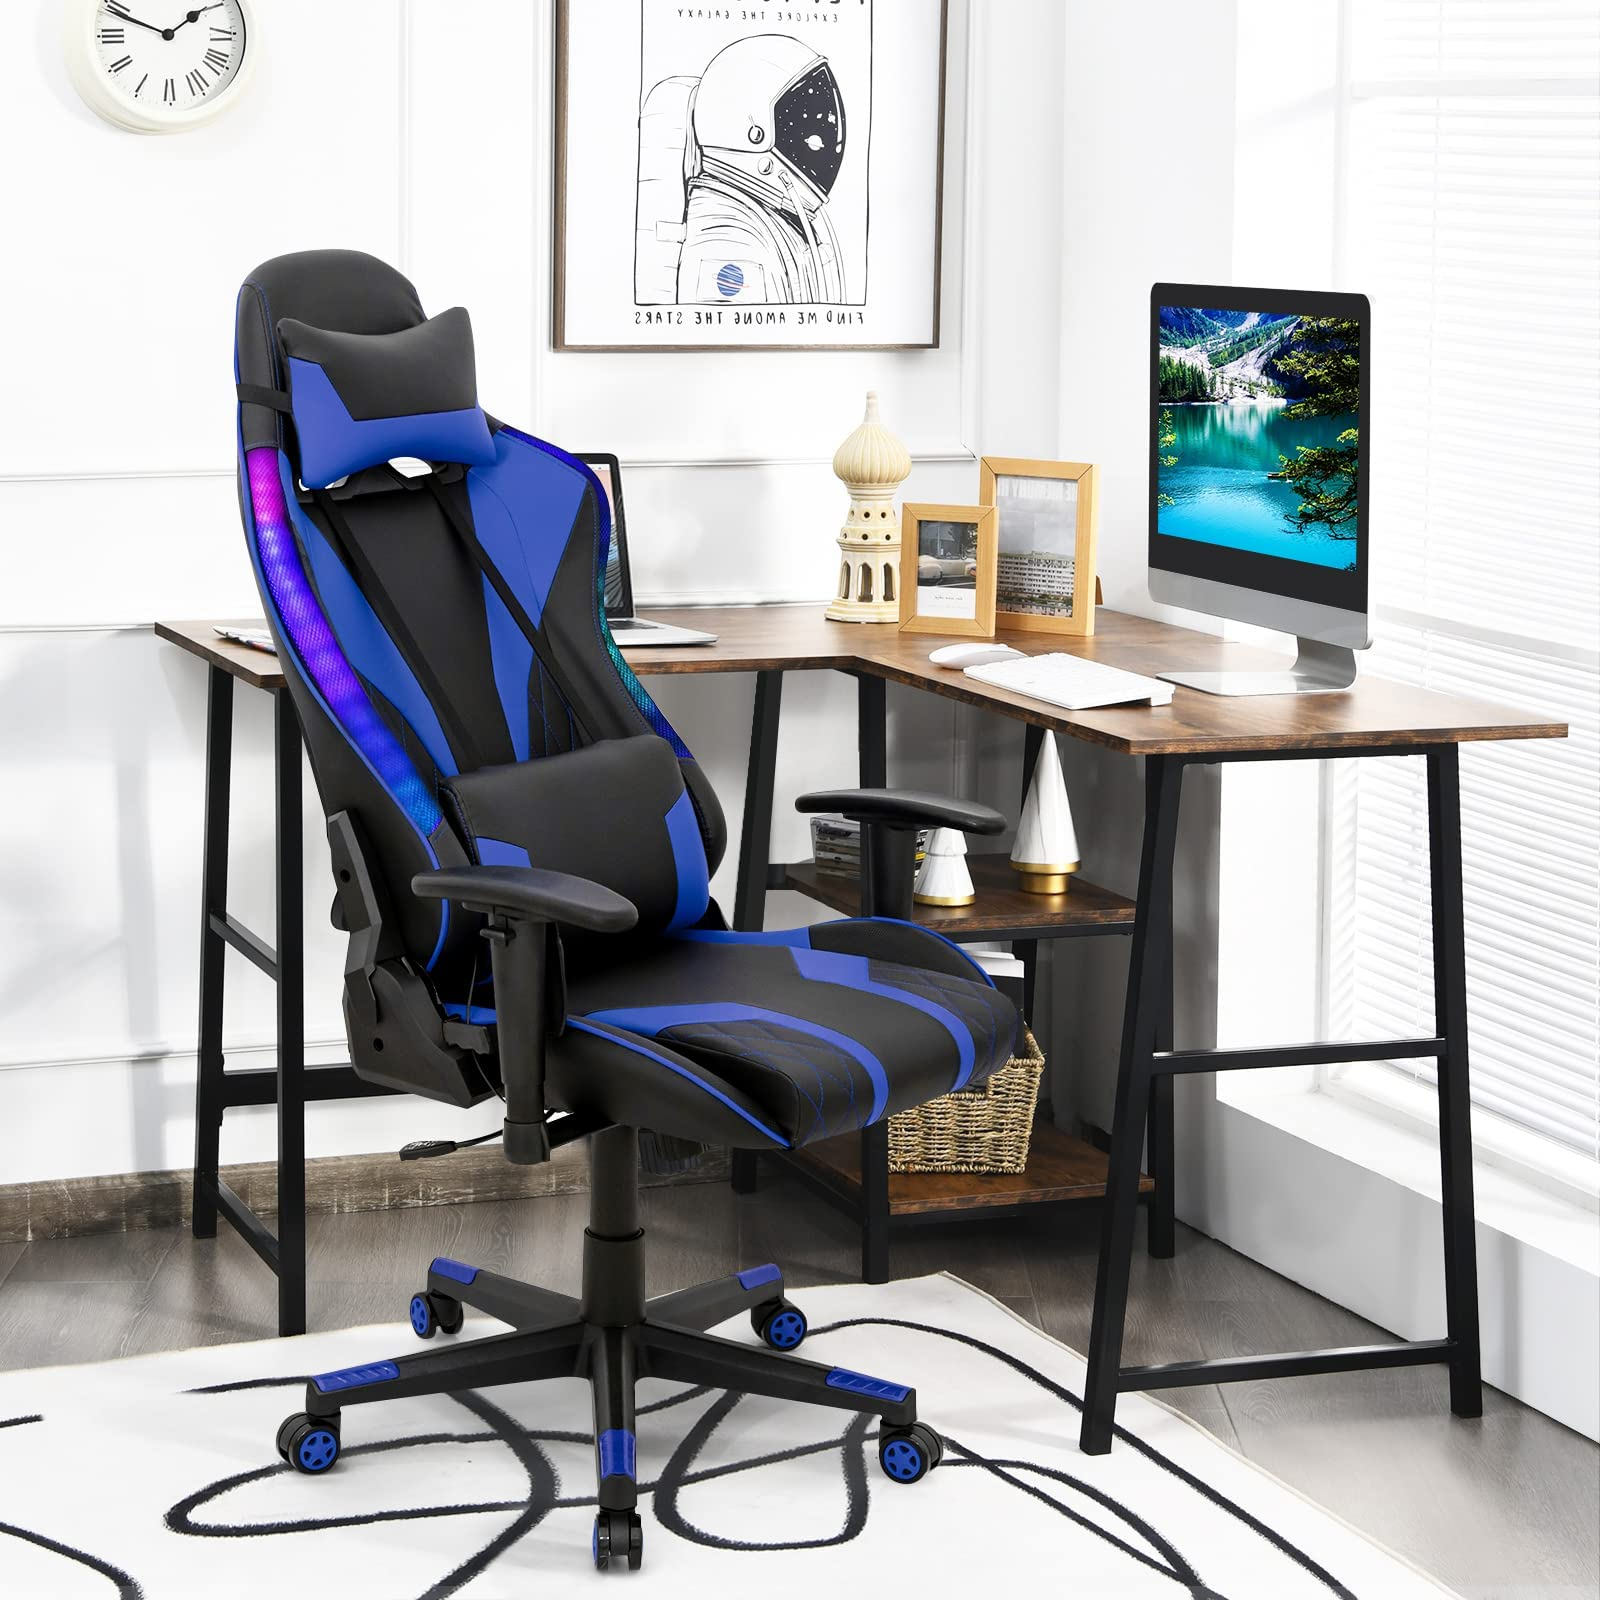 Giantex Gaming Chair with RGB LED Lights, Ergonomic Video Game Chair